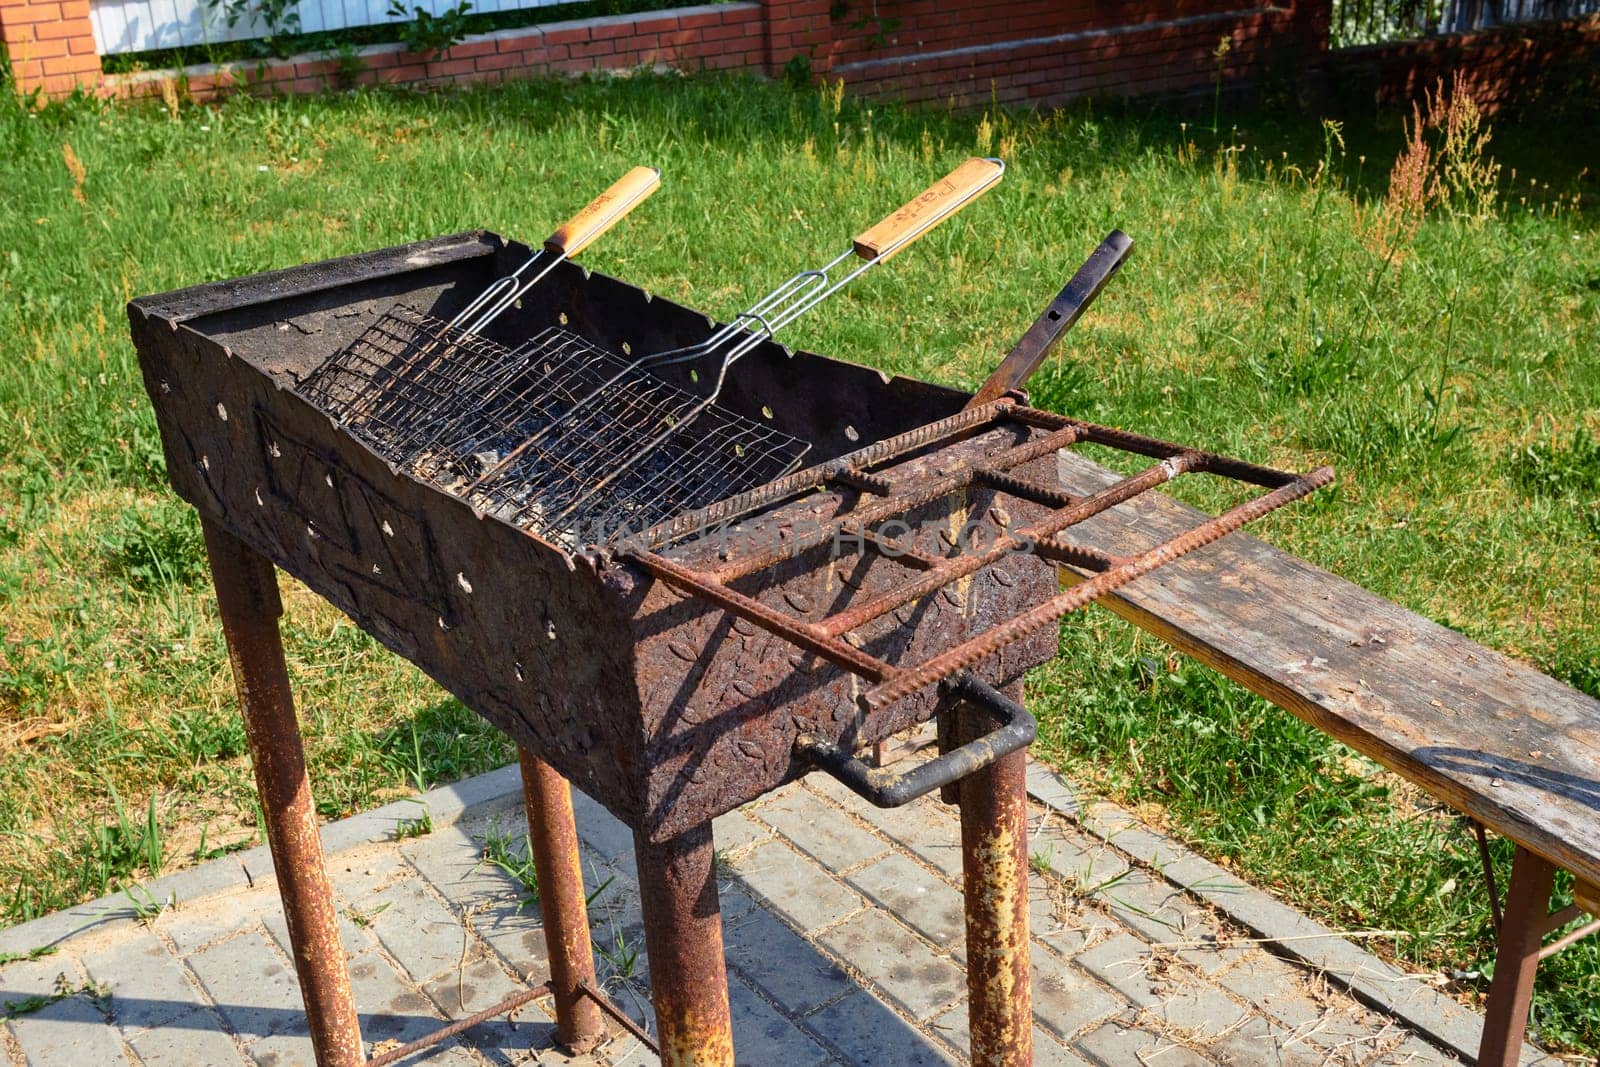 Photo a tall metal grill with skewers. Cooking kebabs. Country life.